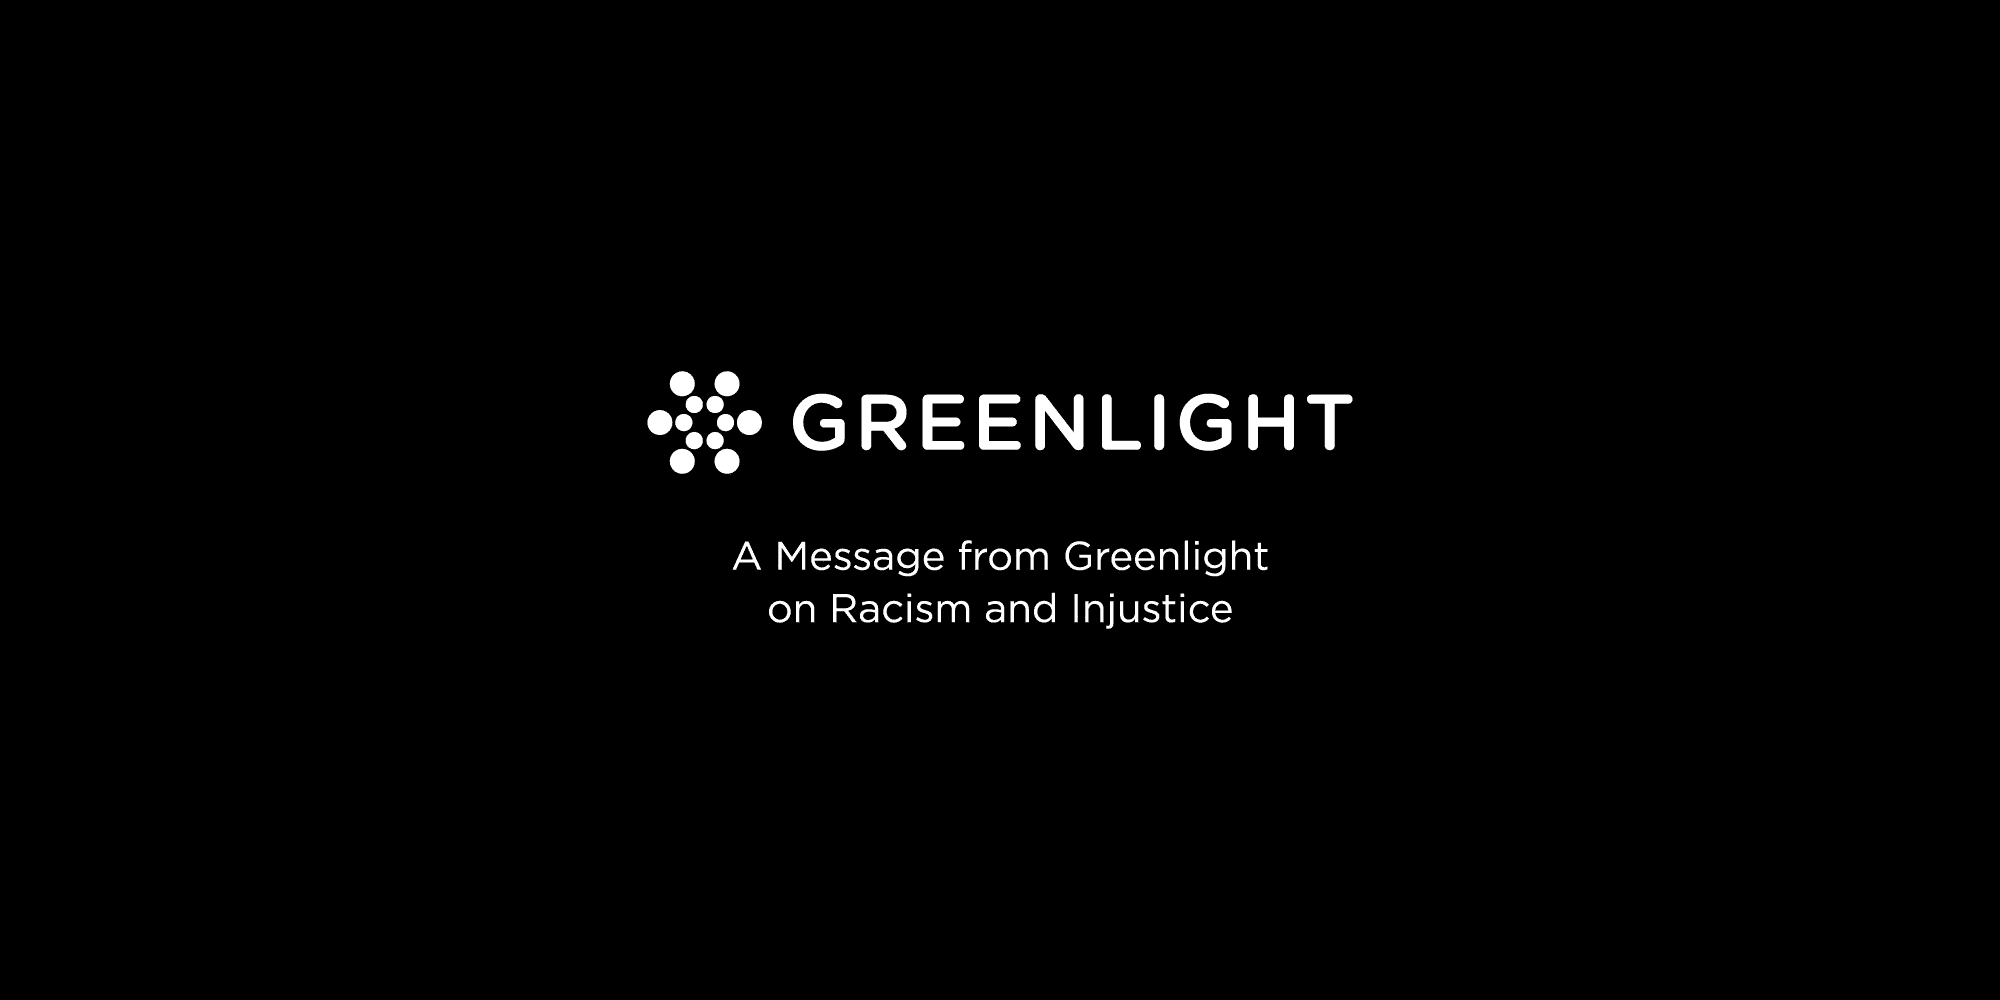 A Message from Greenlight on Racism and Injustice